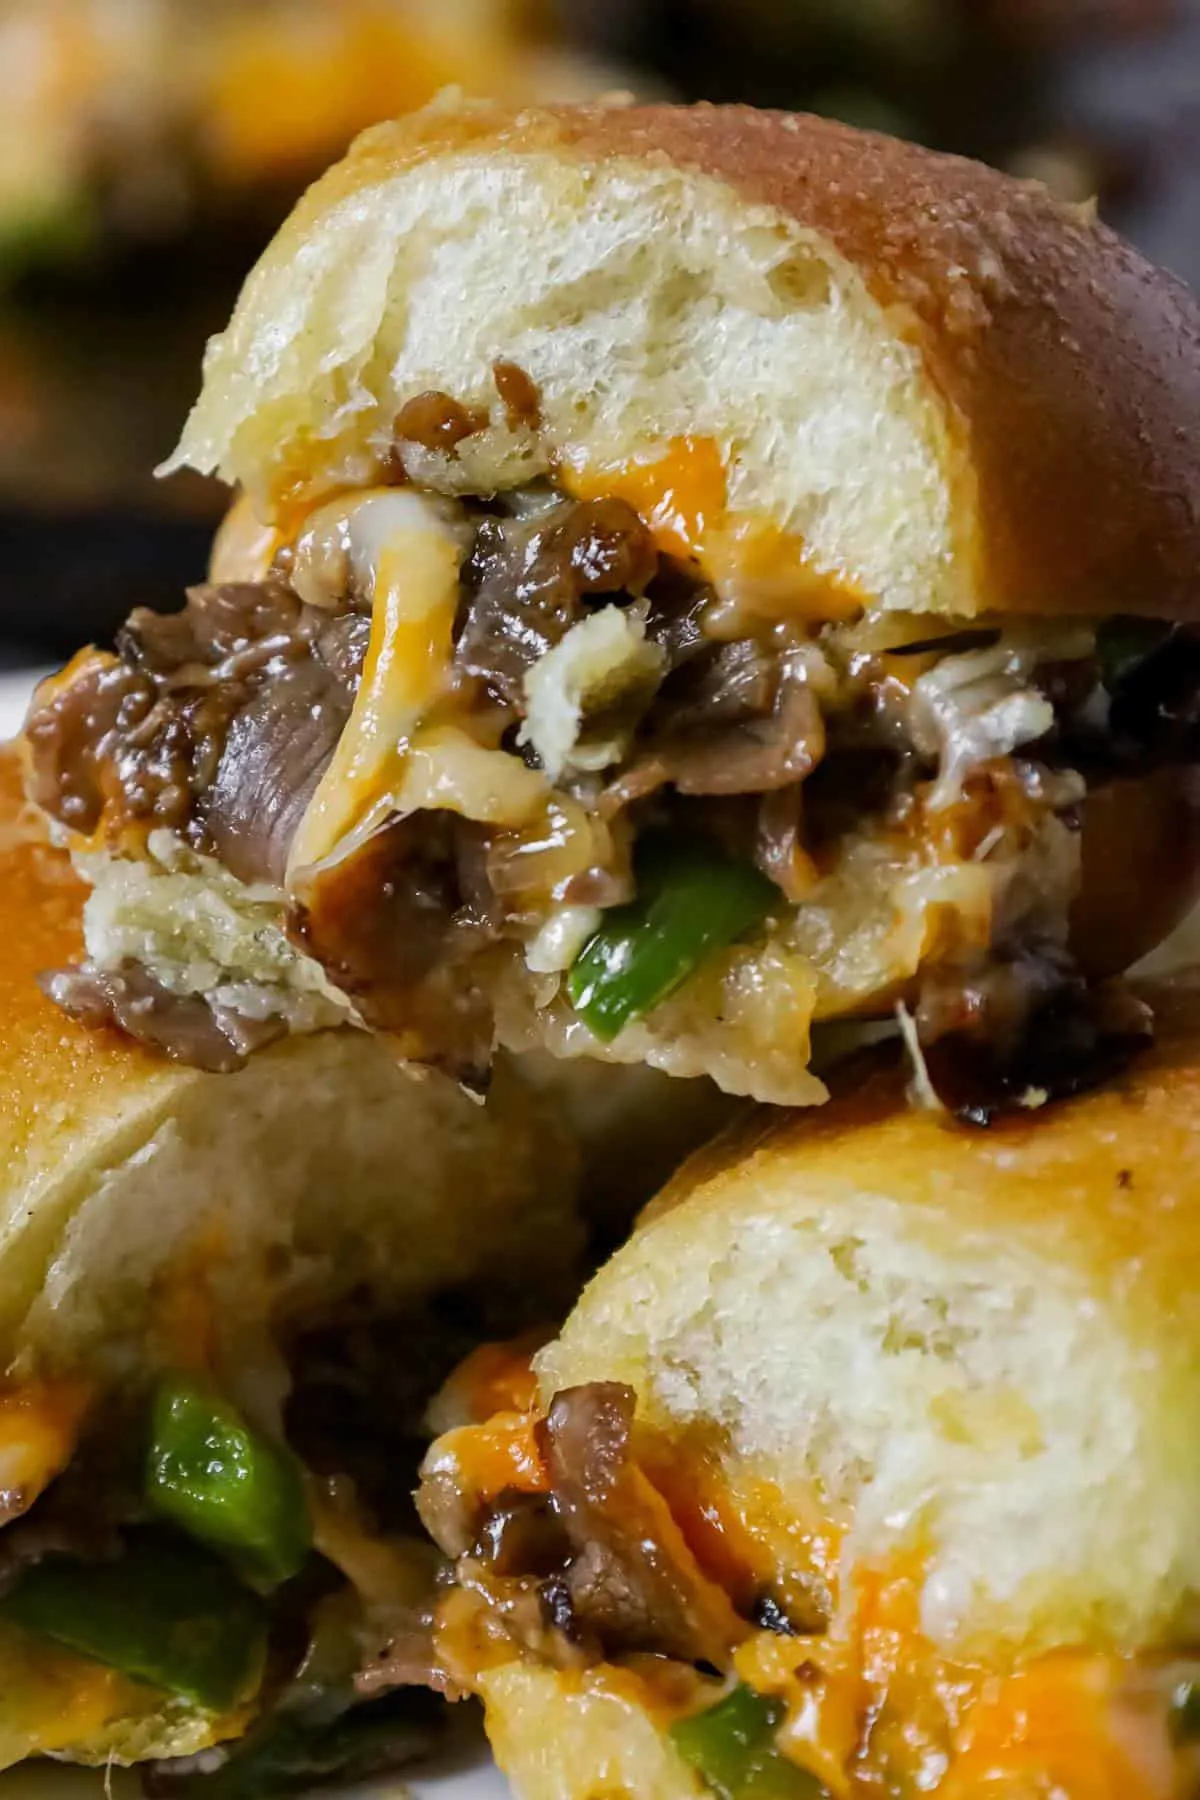 Philly Cheese Steak Sliders are delicious mini sandwiches loaded with chopped roast beef, green peppers, onions and shredded cheese.